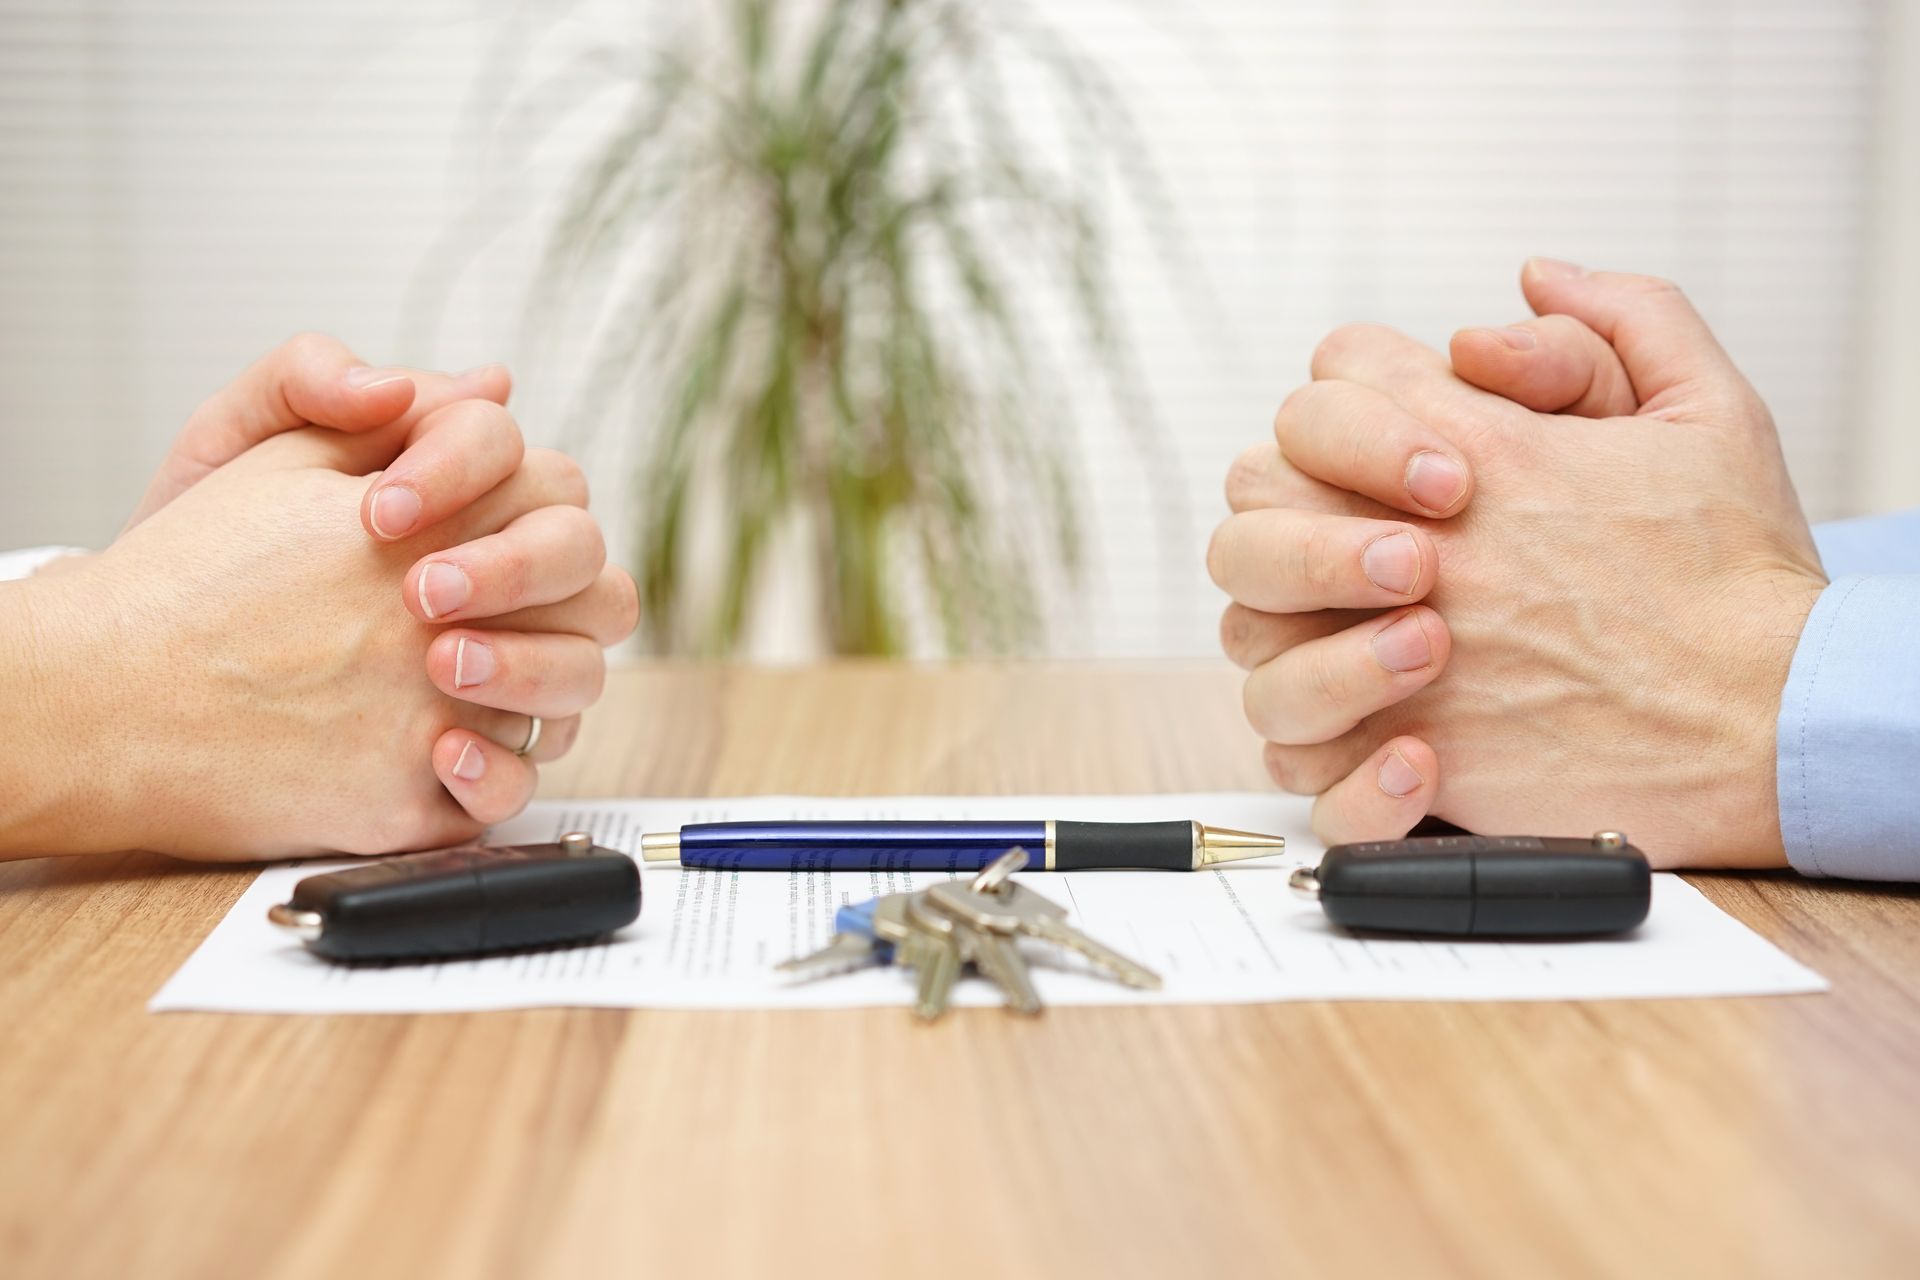 Two hands placed closely together on a table, with keys resting on top.